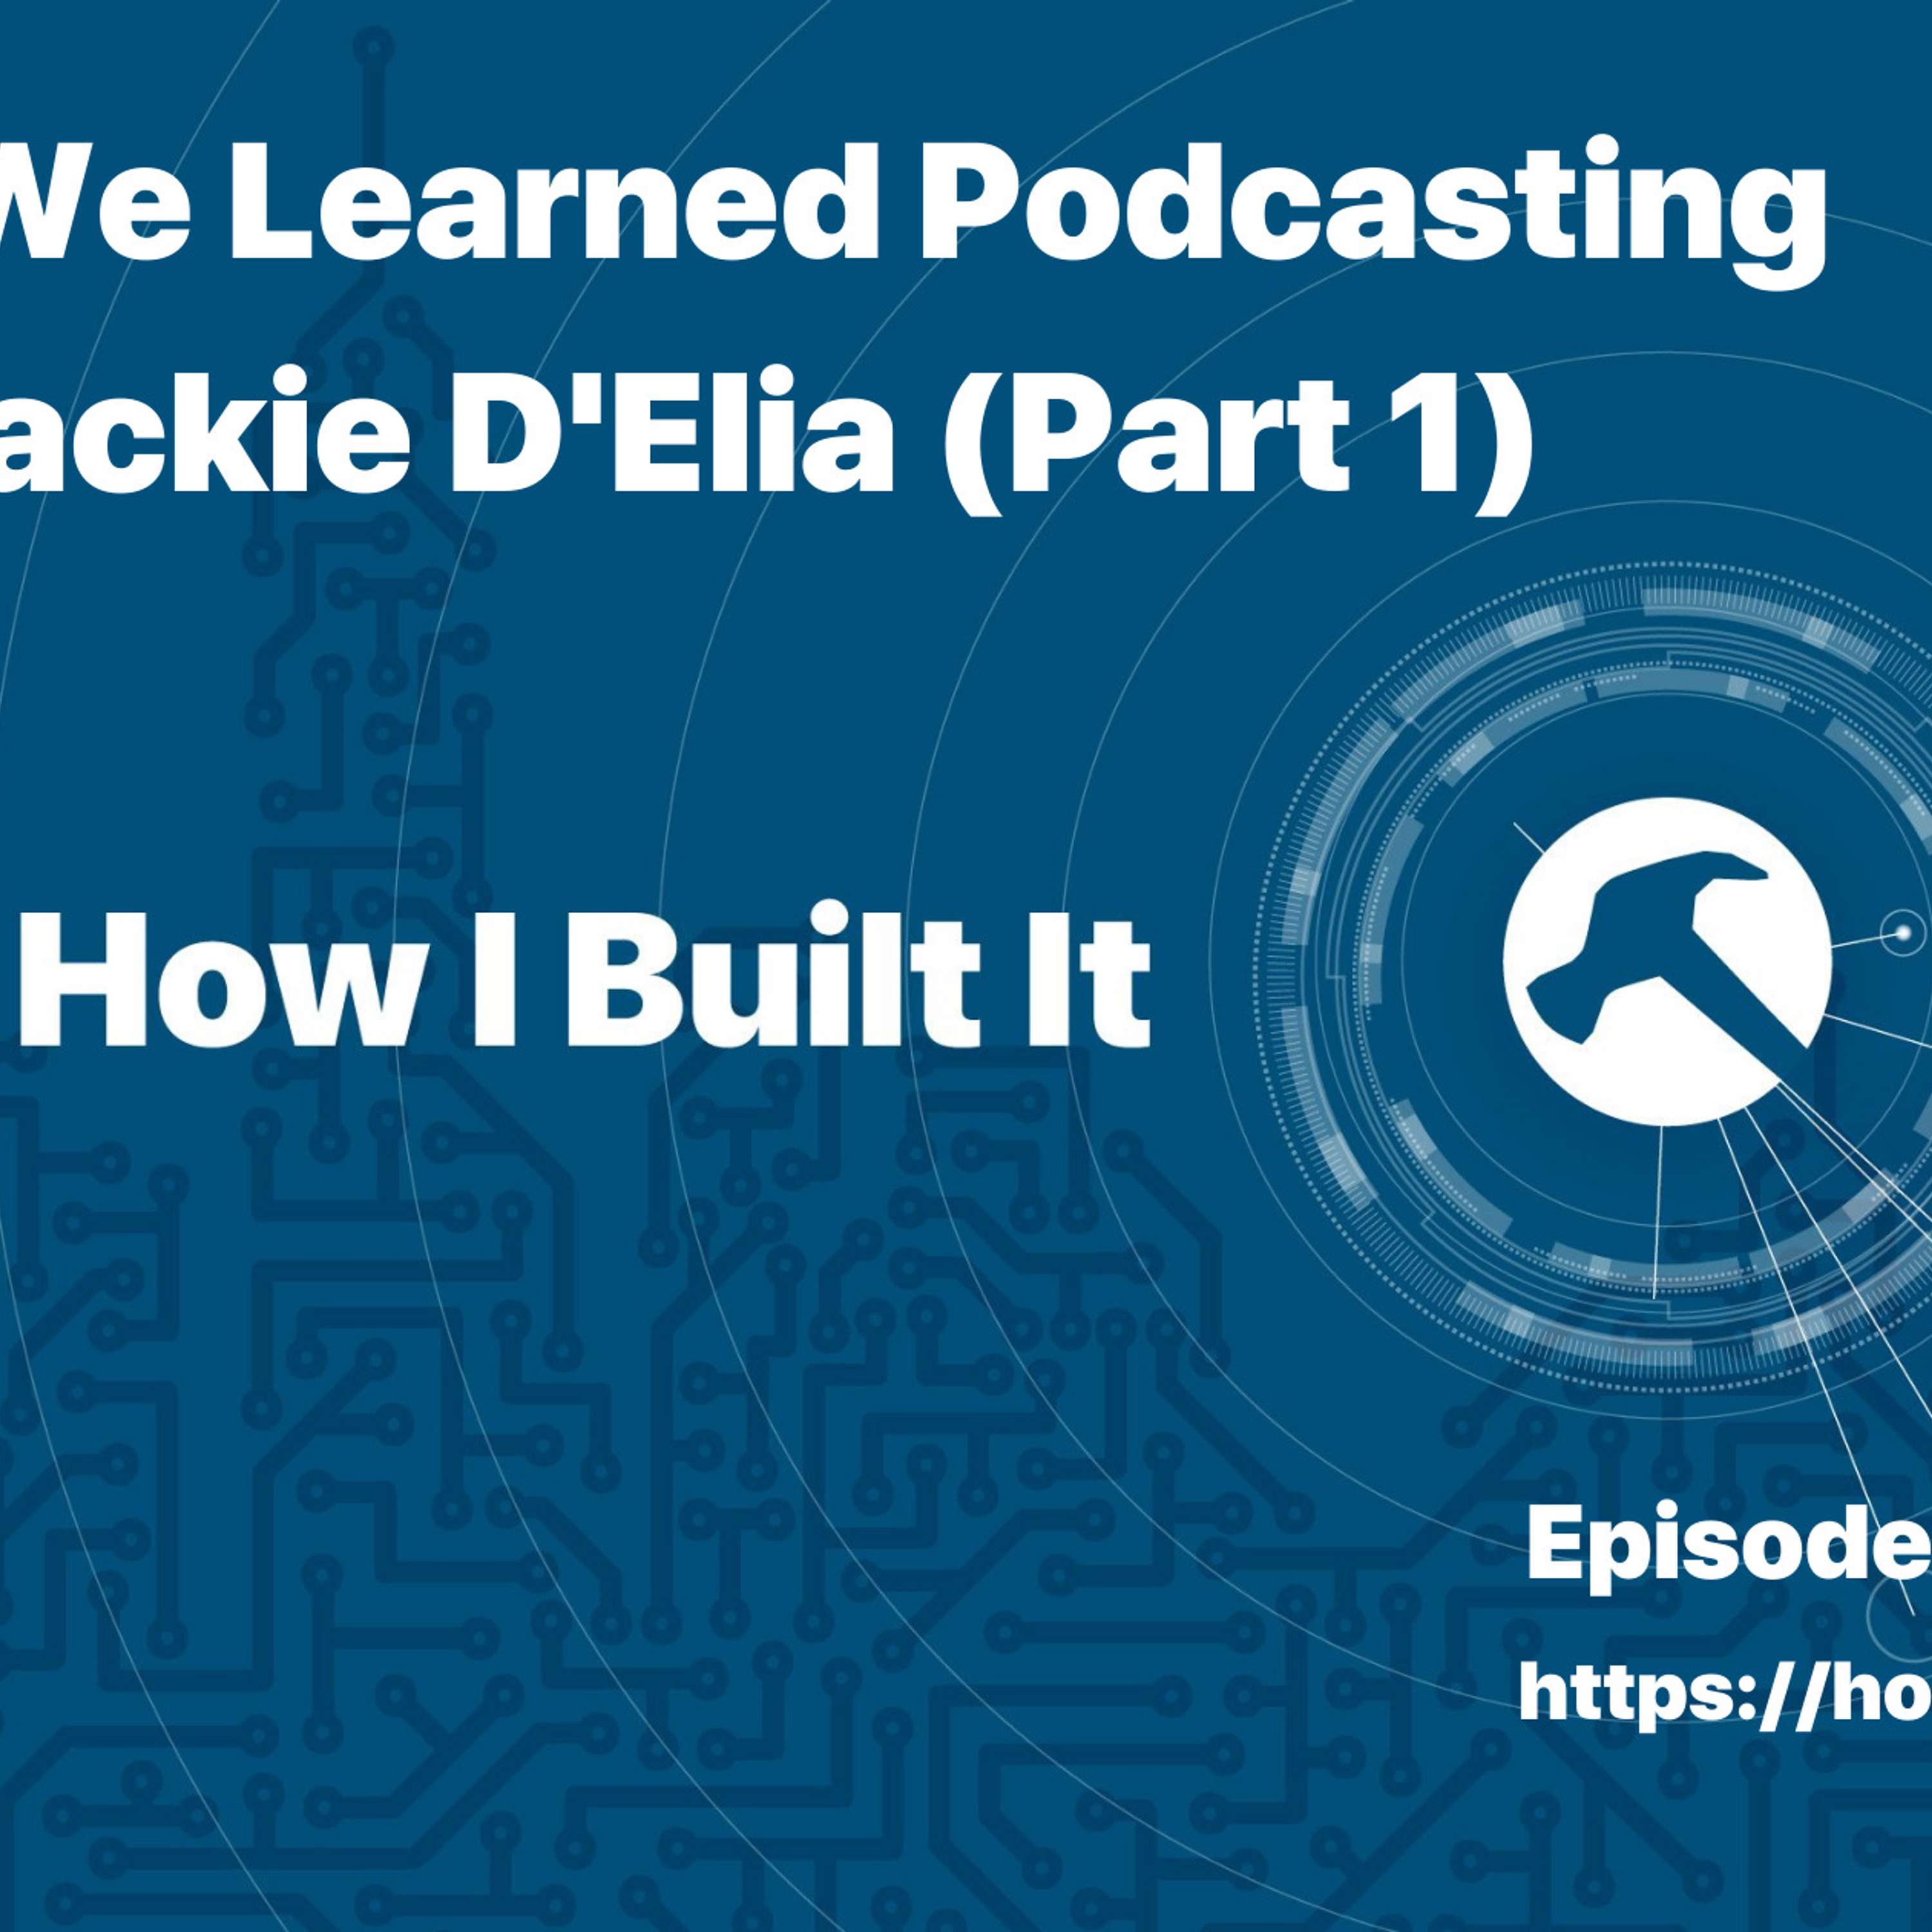 What We Learned Podcasting with Jackie D’Elia (Part 1)